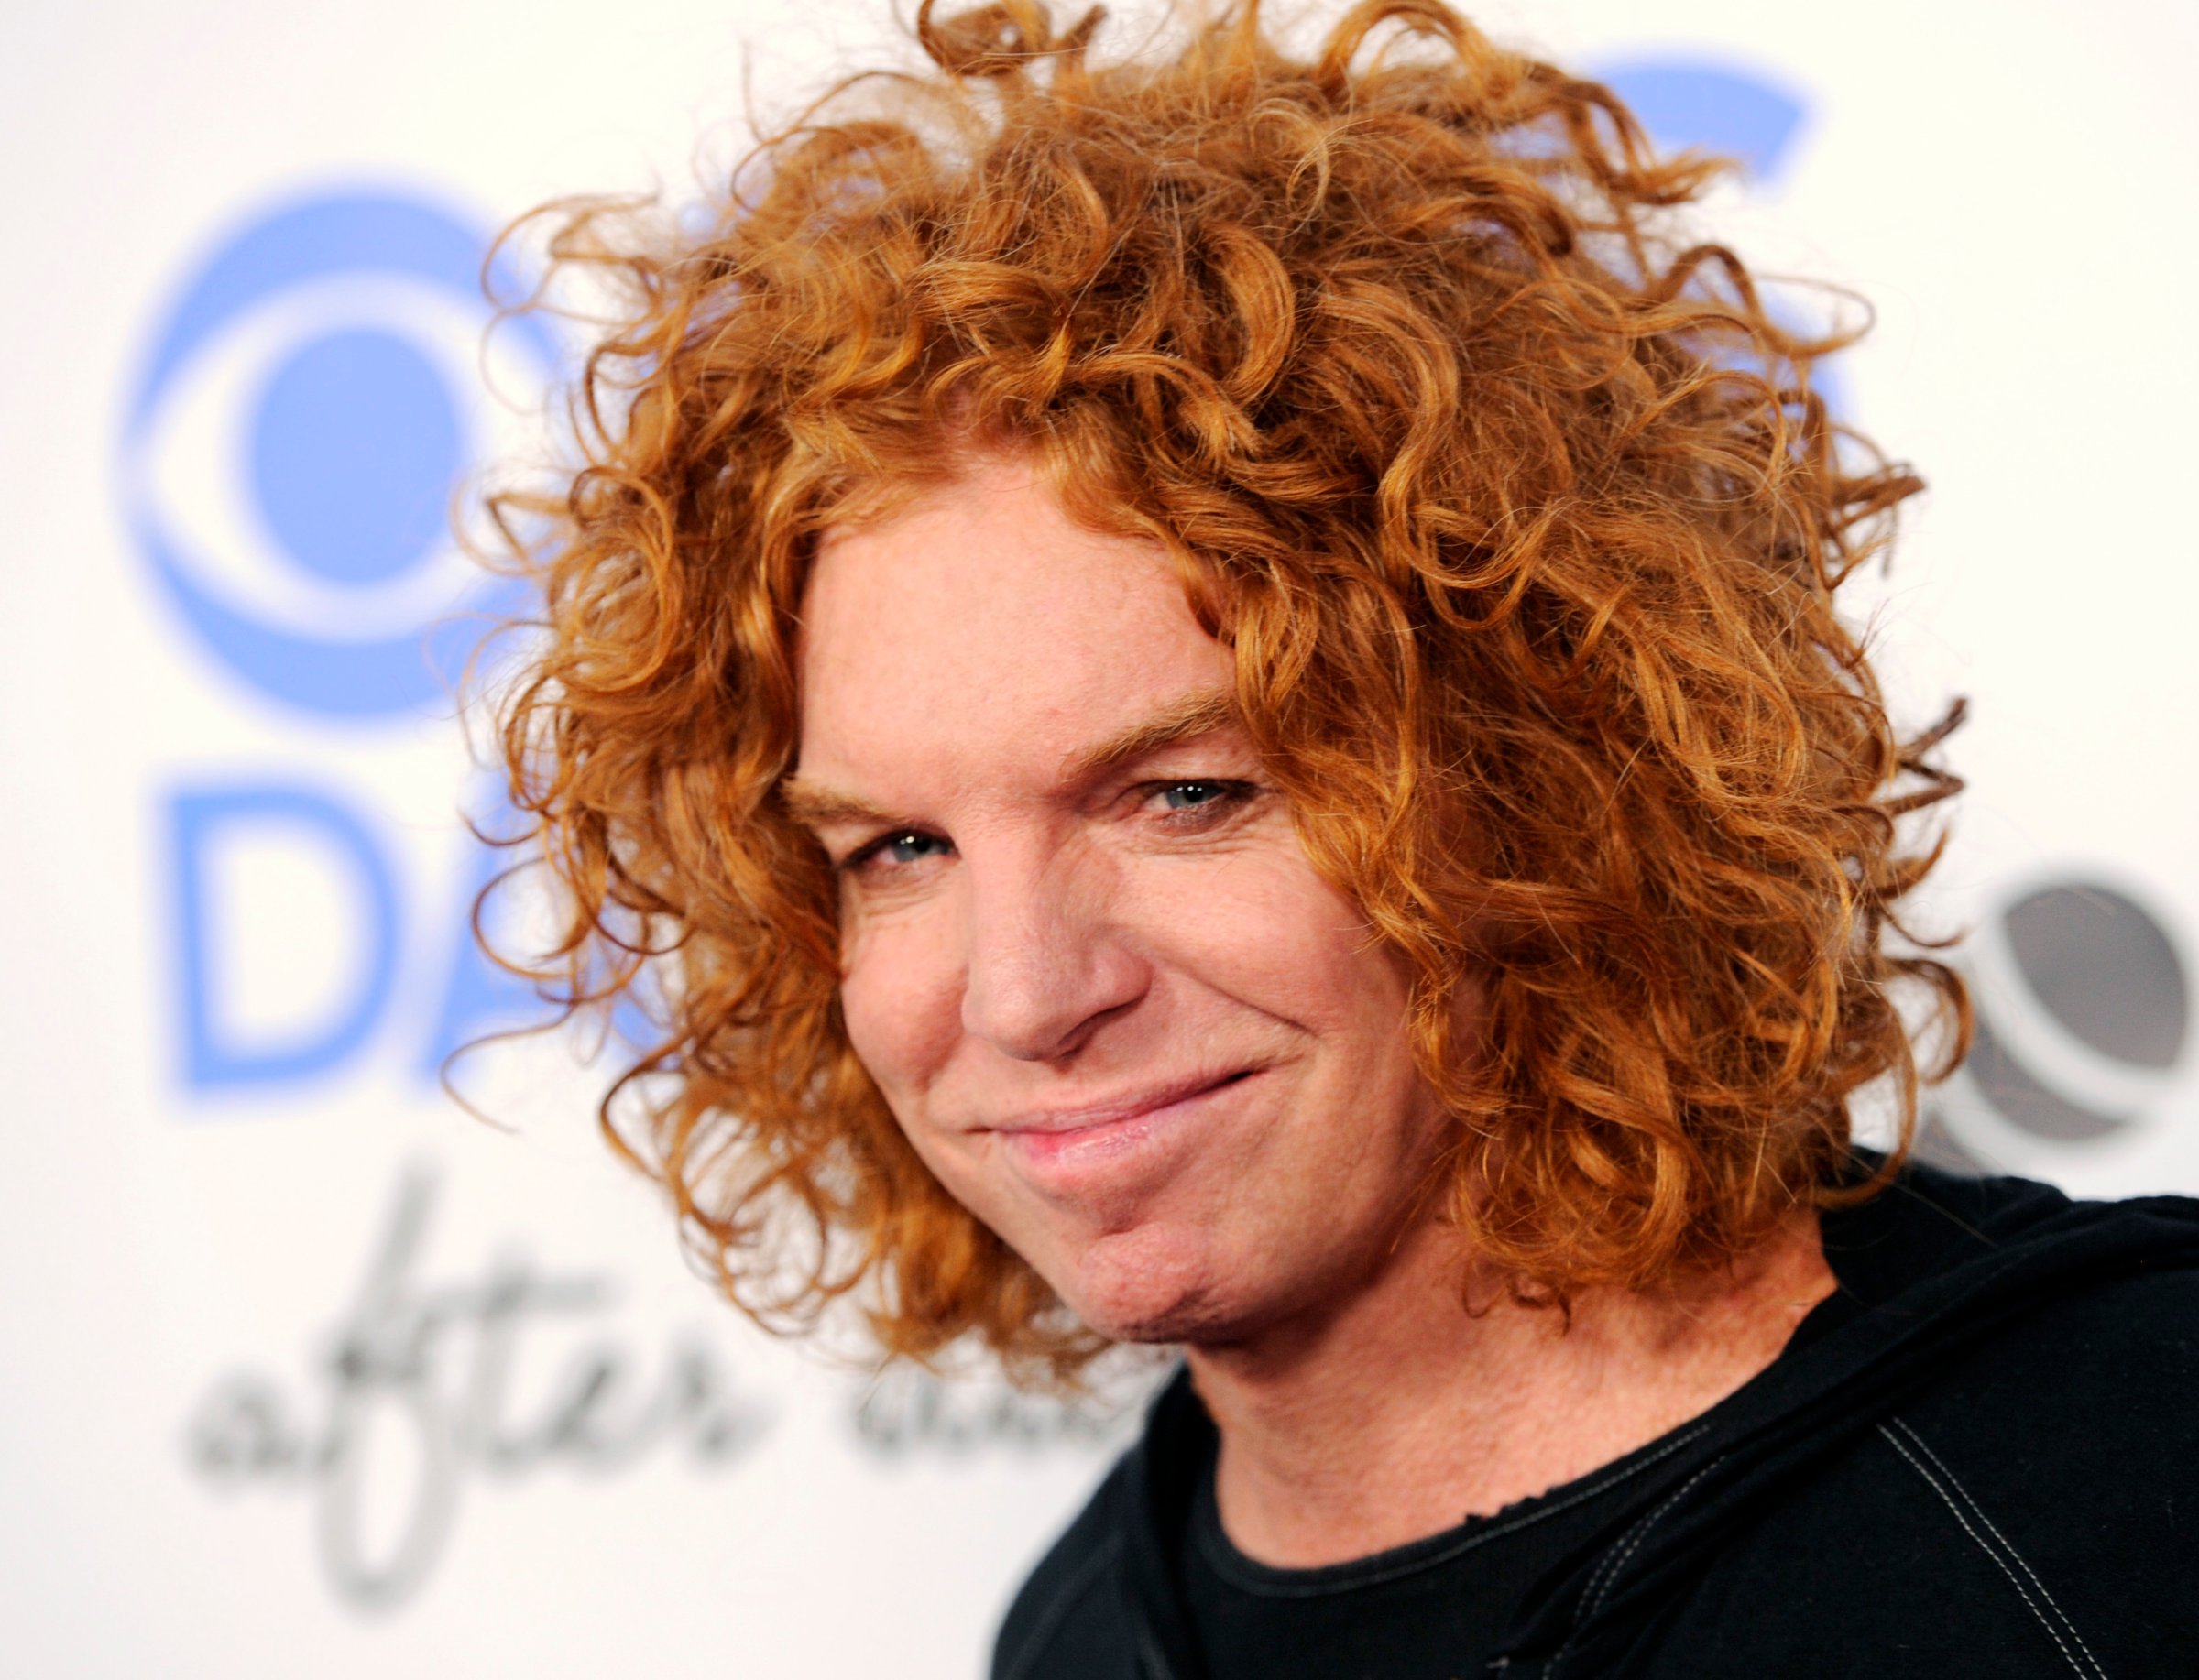 Comedian Carrot Top arrives at the CBS Daytime After Dark comedy event at The Comedy Store on Oct. 8, 2013 in West Hollywood, Calif.